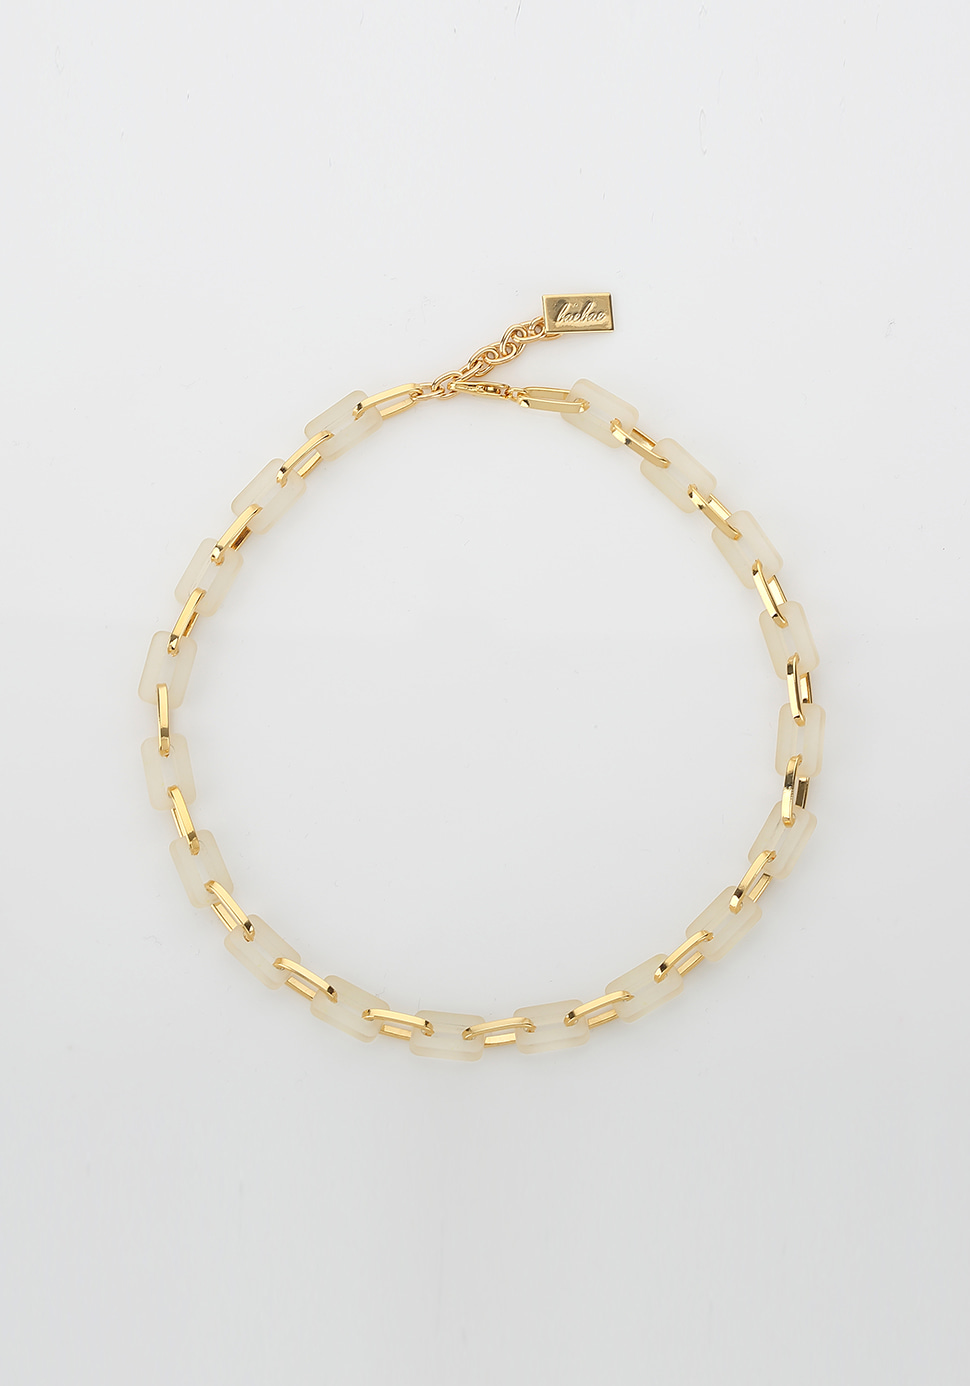 Acrylic Chain Necklace (ivory-2 length)